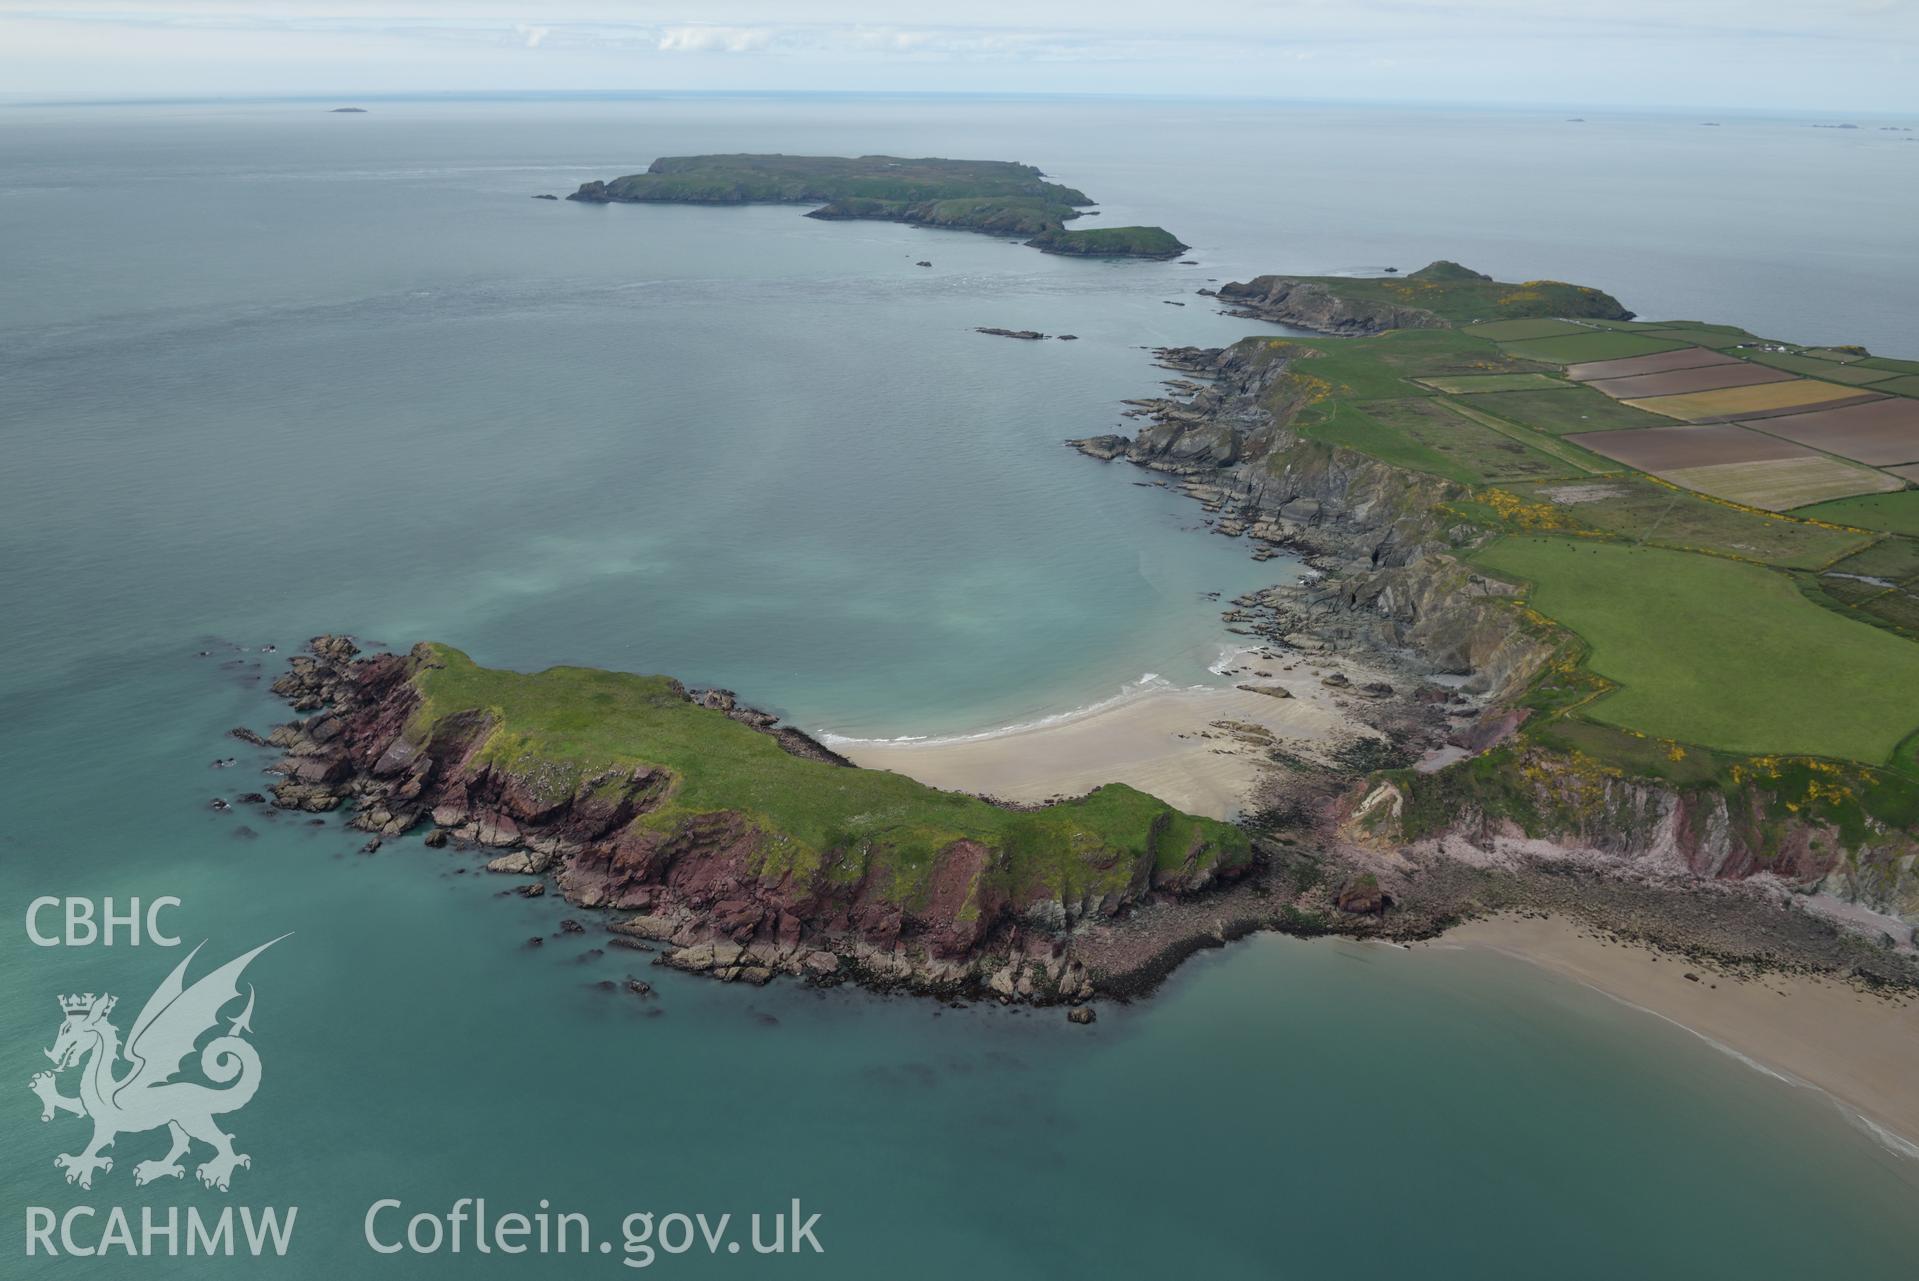 Gateholm Island at extreme low tide. Baseline aerial reconnaissance survey for the CHERISH Project. ? Crown: CHERISH PROJECT 2017. Produced with EU funds through the Ireland Wales Co-operation Programme 2014-2020. All material made freely available through the Open Government Licence.